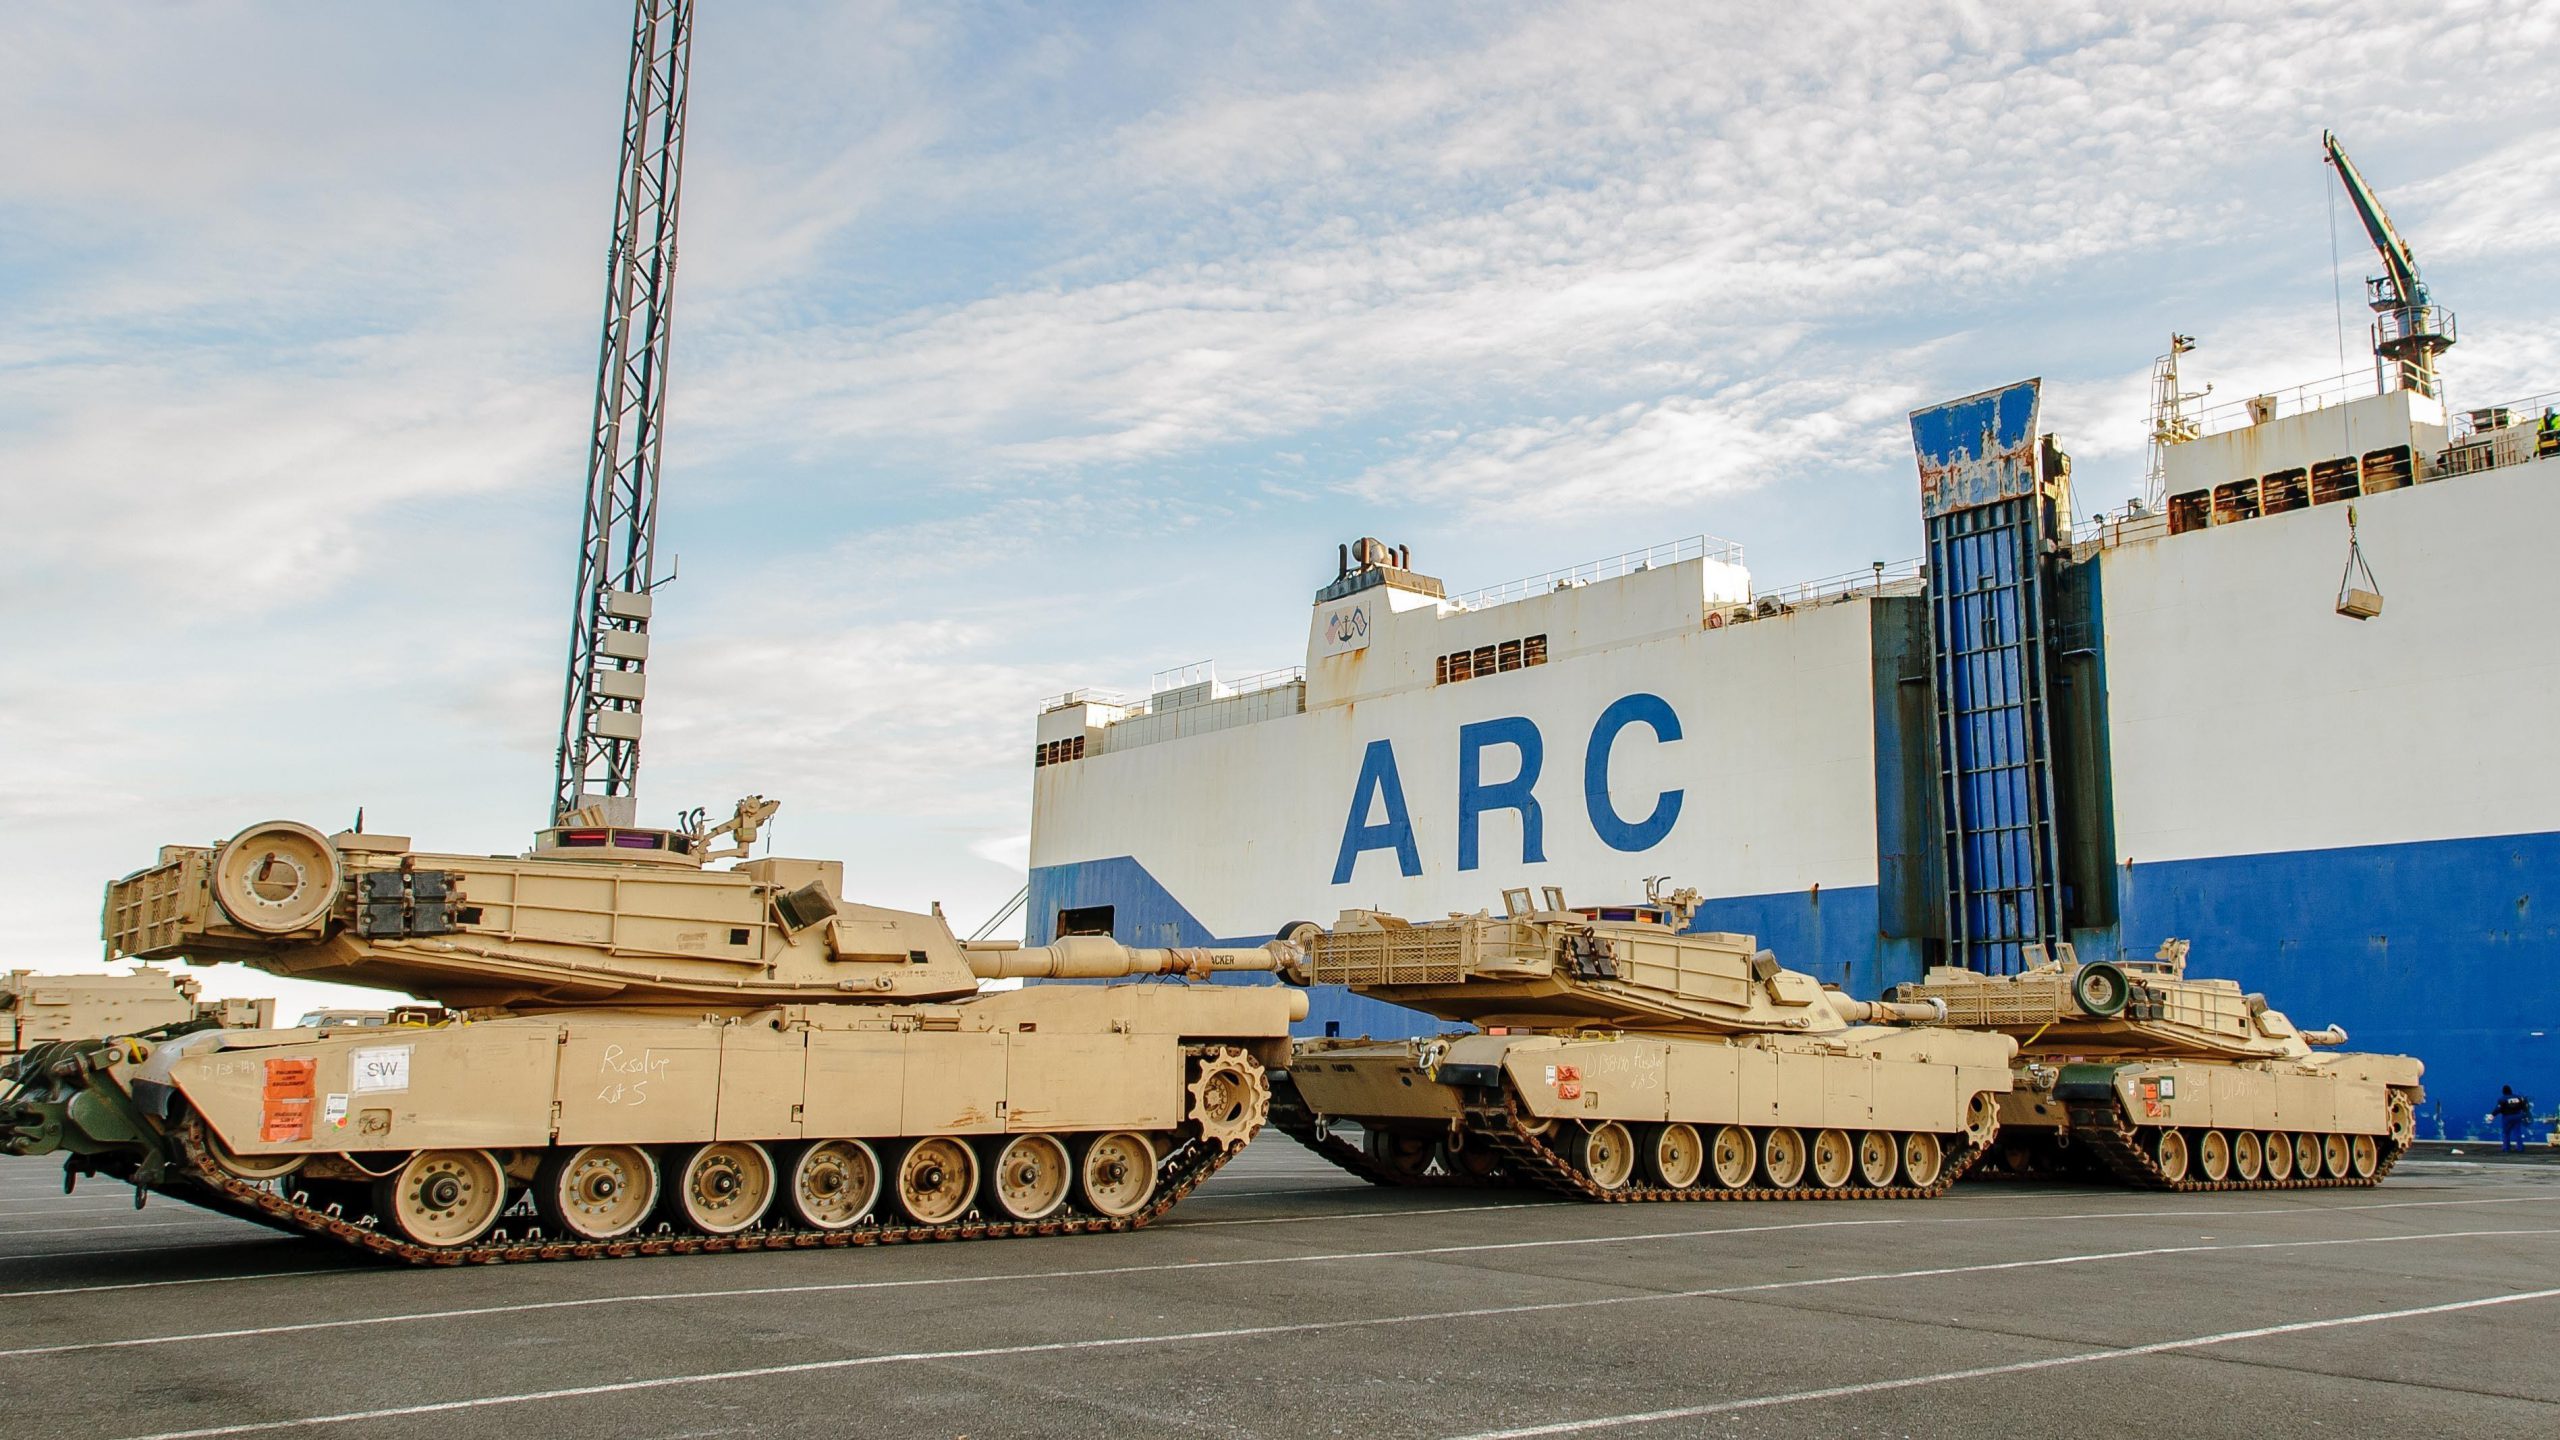 M1A2 Abrams tanks and other military vehicles belonging to the 3rd Brigade Combat Team, 4th Infantry Division disembark from the ship ARC Resolve at the port in Bremerhaven, Germany, Jan. 6, 2017. The team’s arrival marks the start of back-to-back rotations of armored brigades in Europe as part of Operation Atlantic Resolve. Army photo by Staff Sgt. Micah VanDyke. -